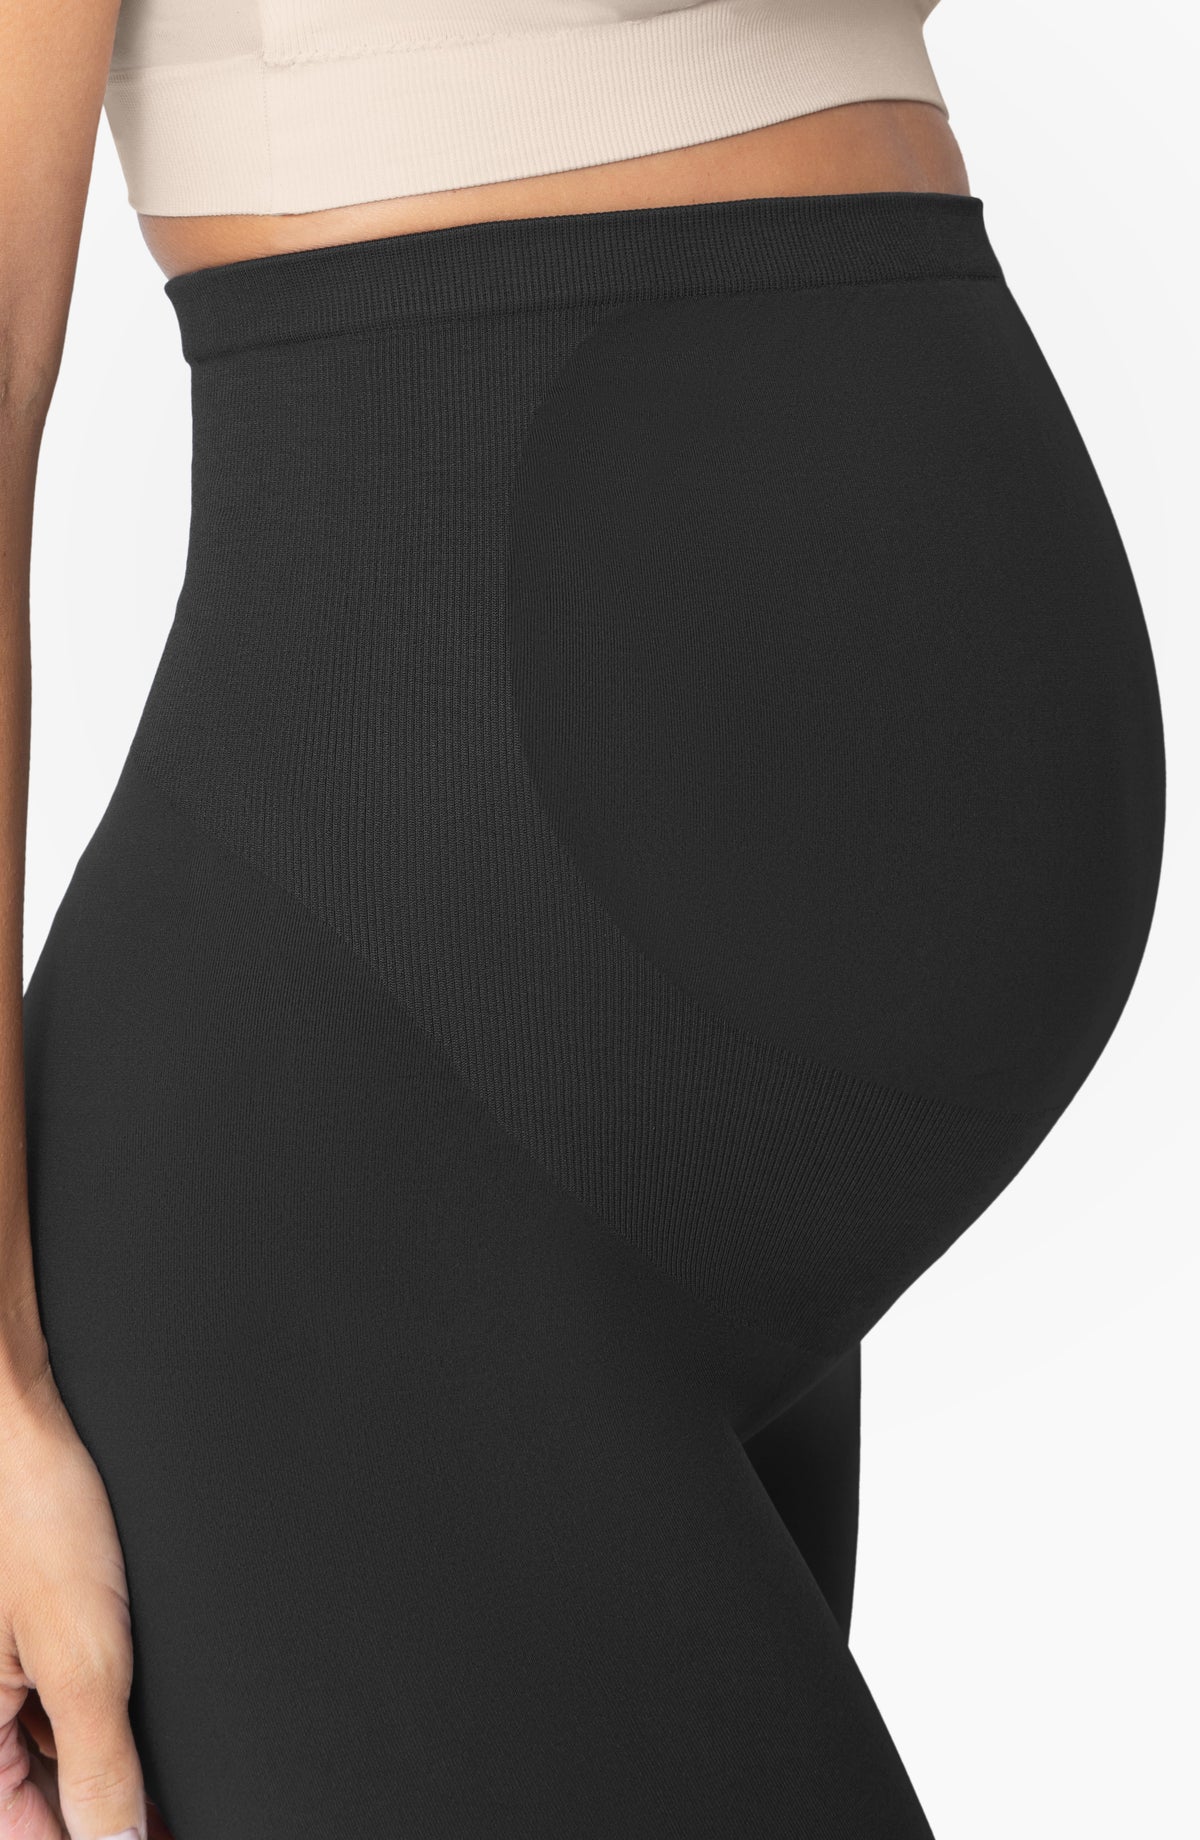 skpabo Maternity Pregnancy Over Bump Support Joggers Comfortable Trousers  for Pregnant Women 